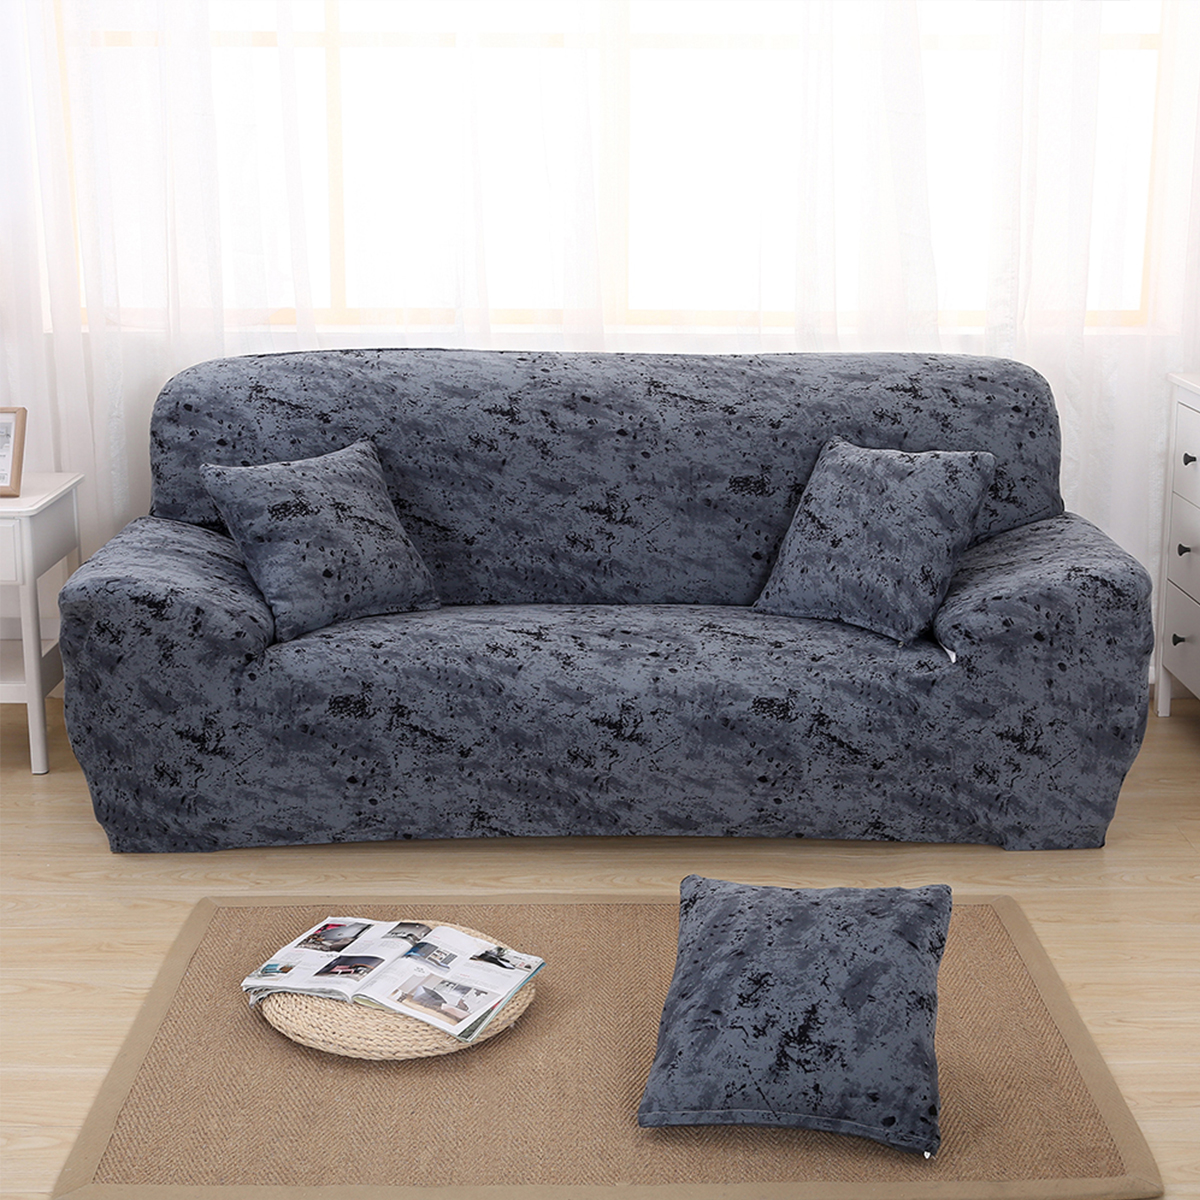 1234-Seater-Universal-Elastic-Stretch-Sofa-Cover-Slipcover-Couch-Washable-Furniture-Protector-1730249-5